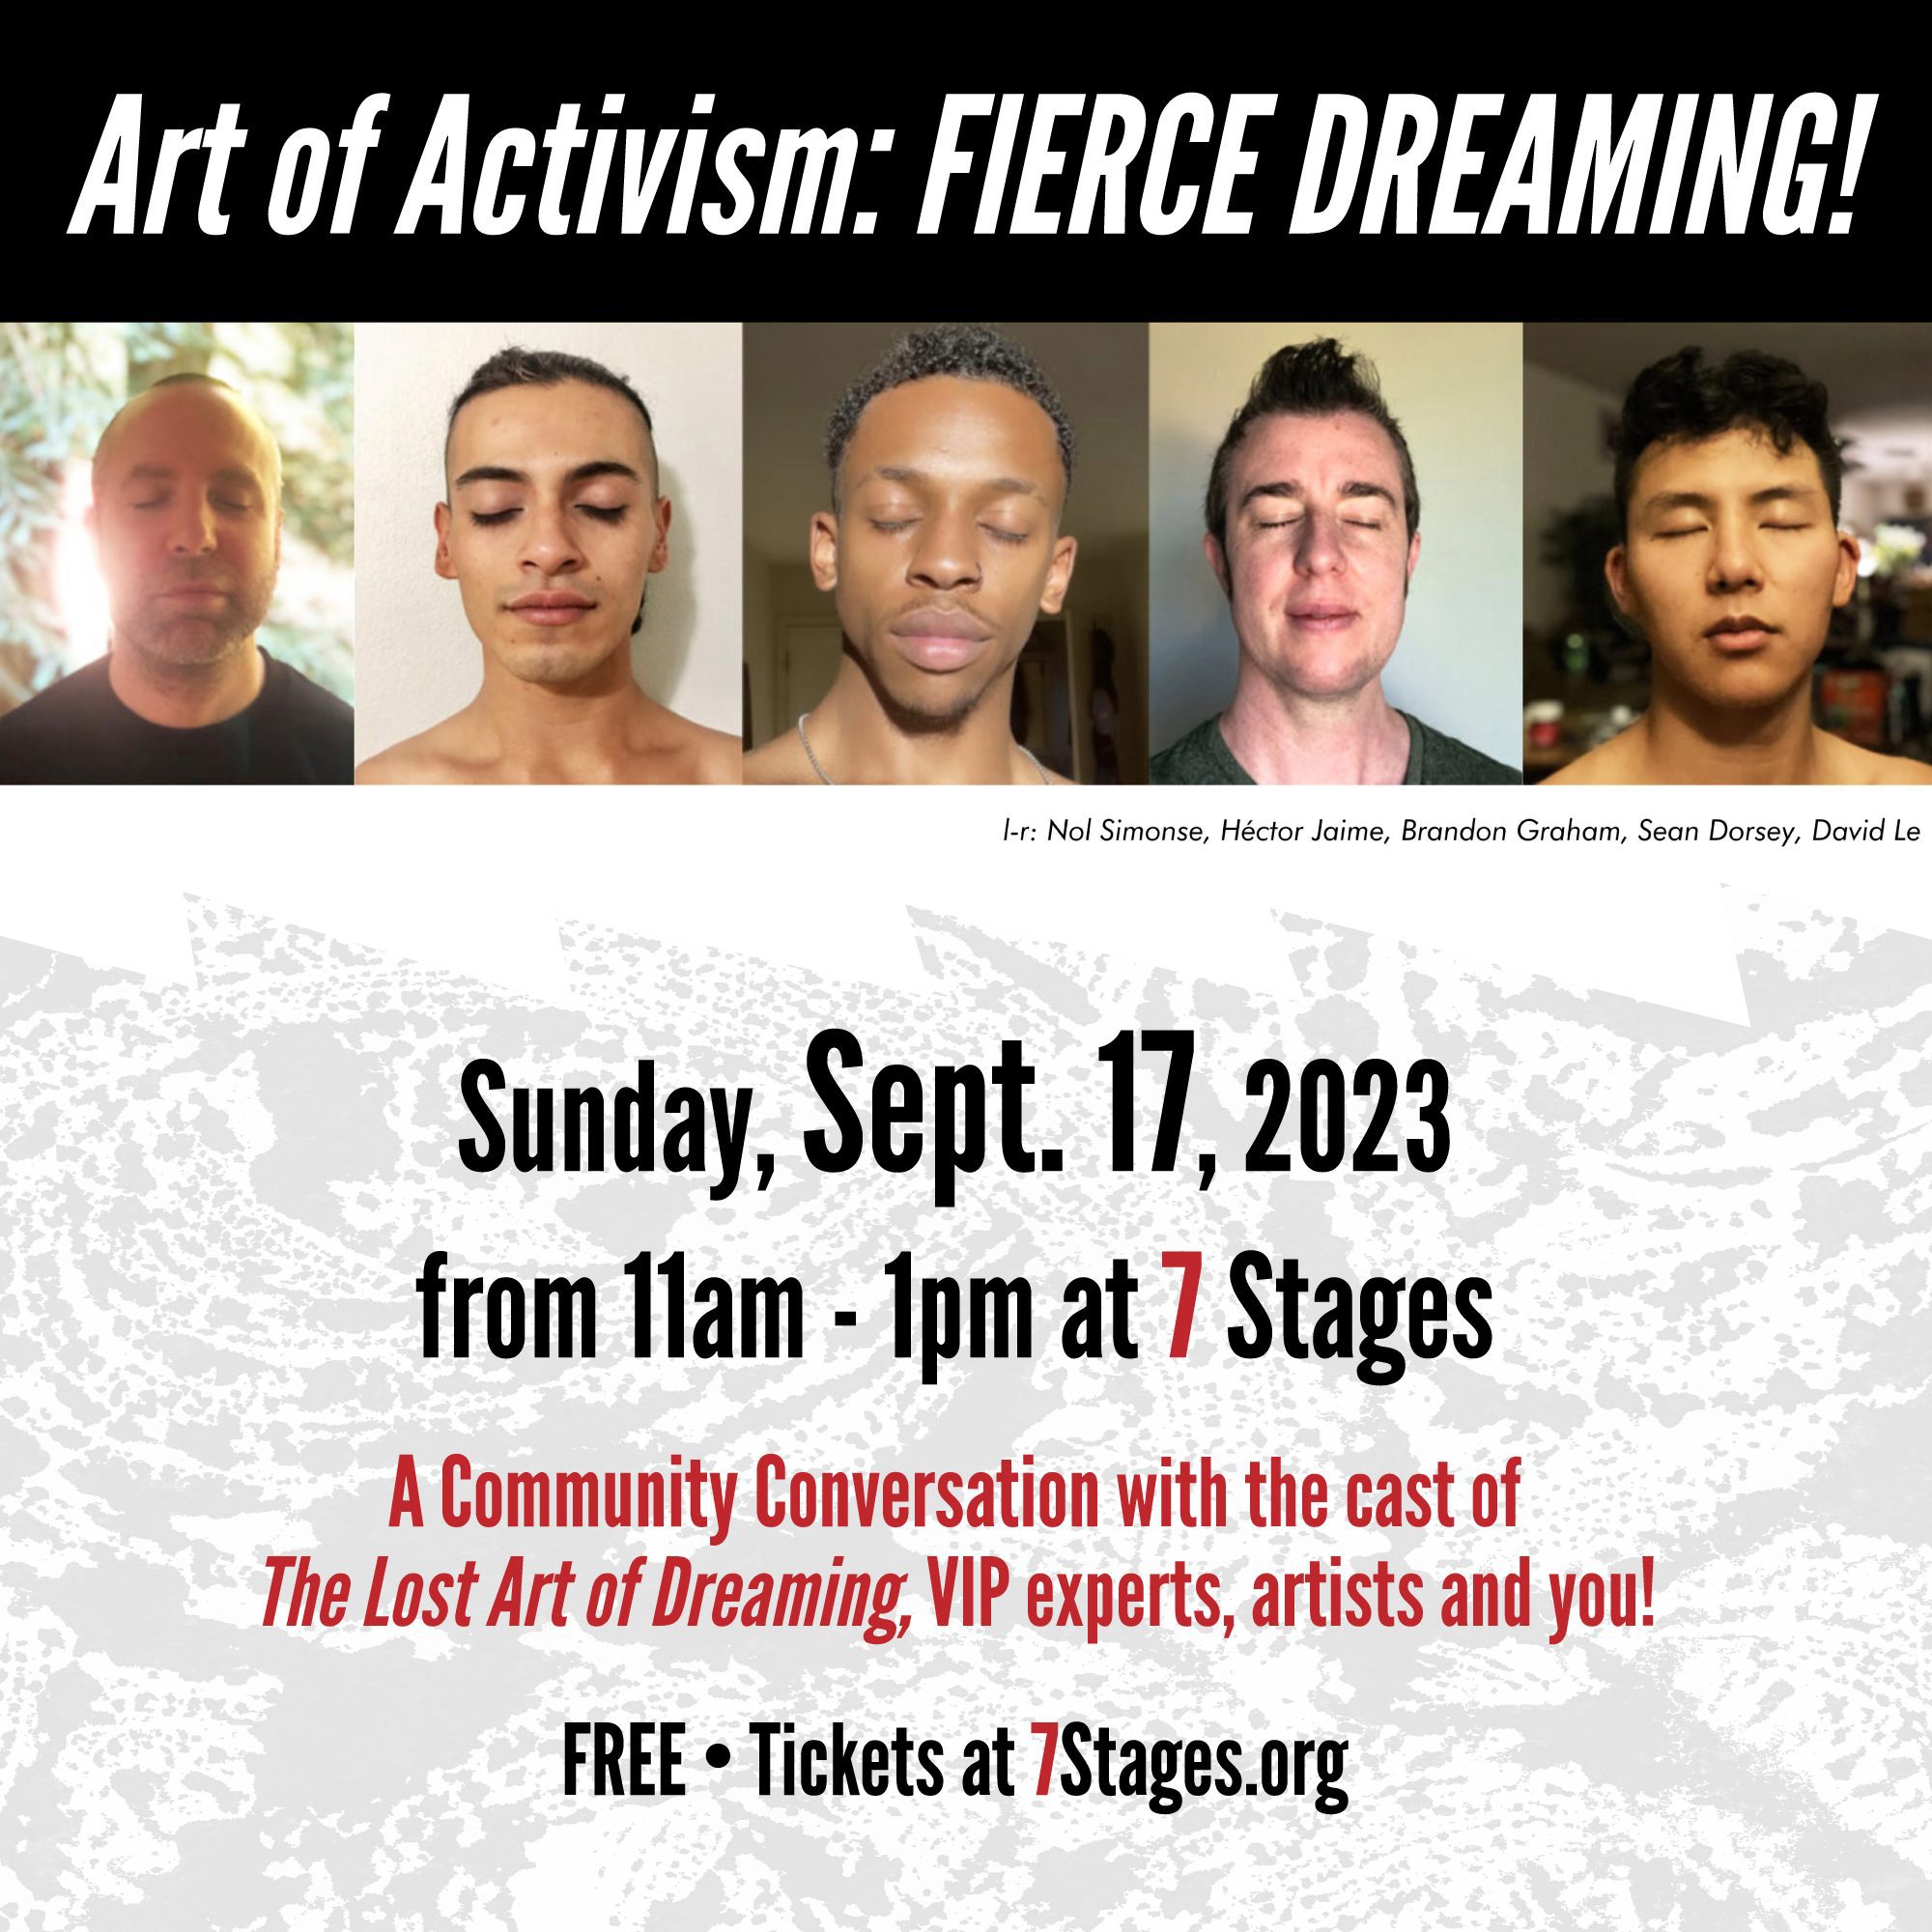 Art of Activism: Fierce Dreaming. Sunday, September 17, 2023 from 11 A.M. to 1 P.M. at 7 Stages. A community conversation with the cast of The Lost Art of Dreaming, V.I.P. experts, artists and you! FREE.